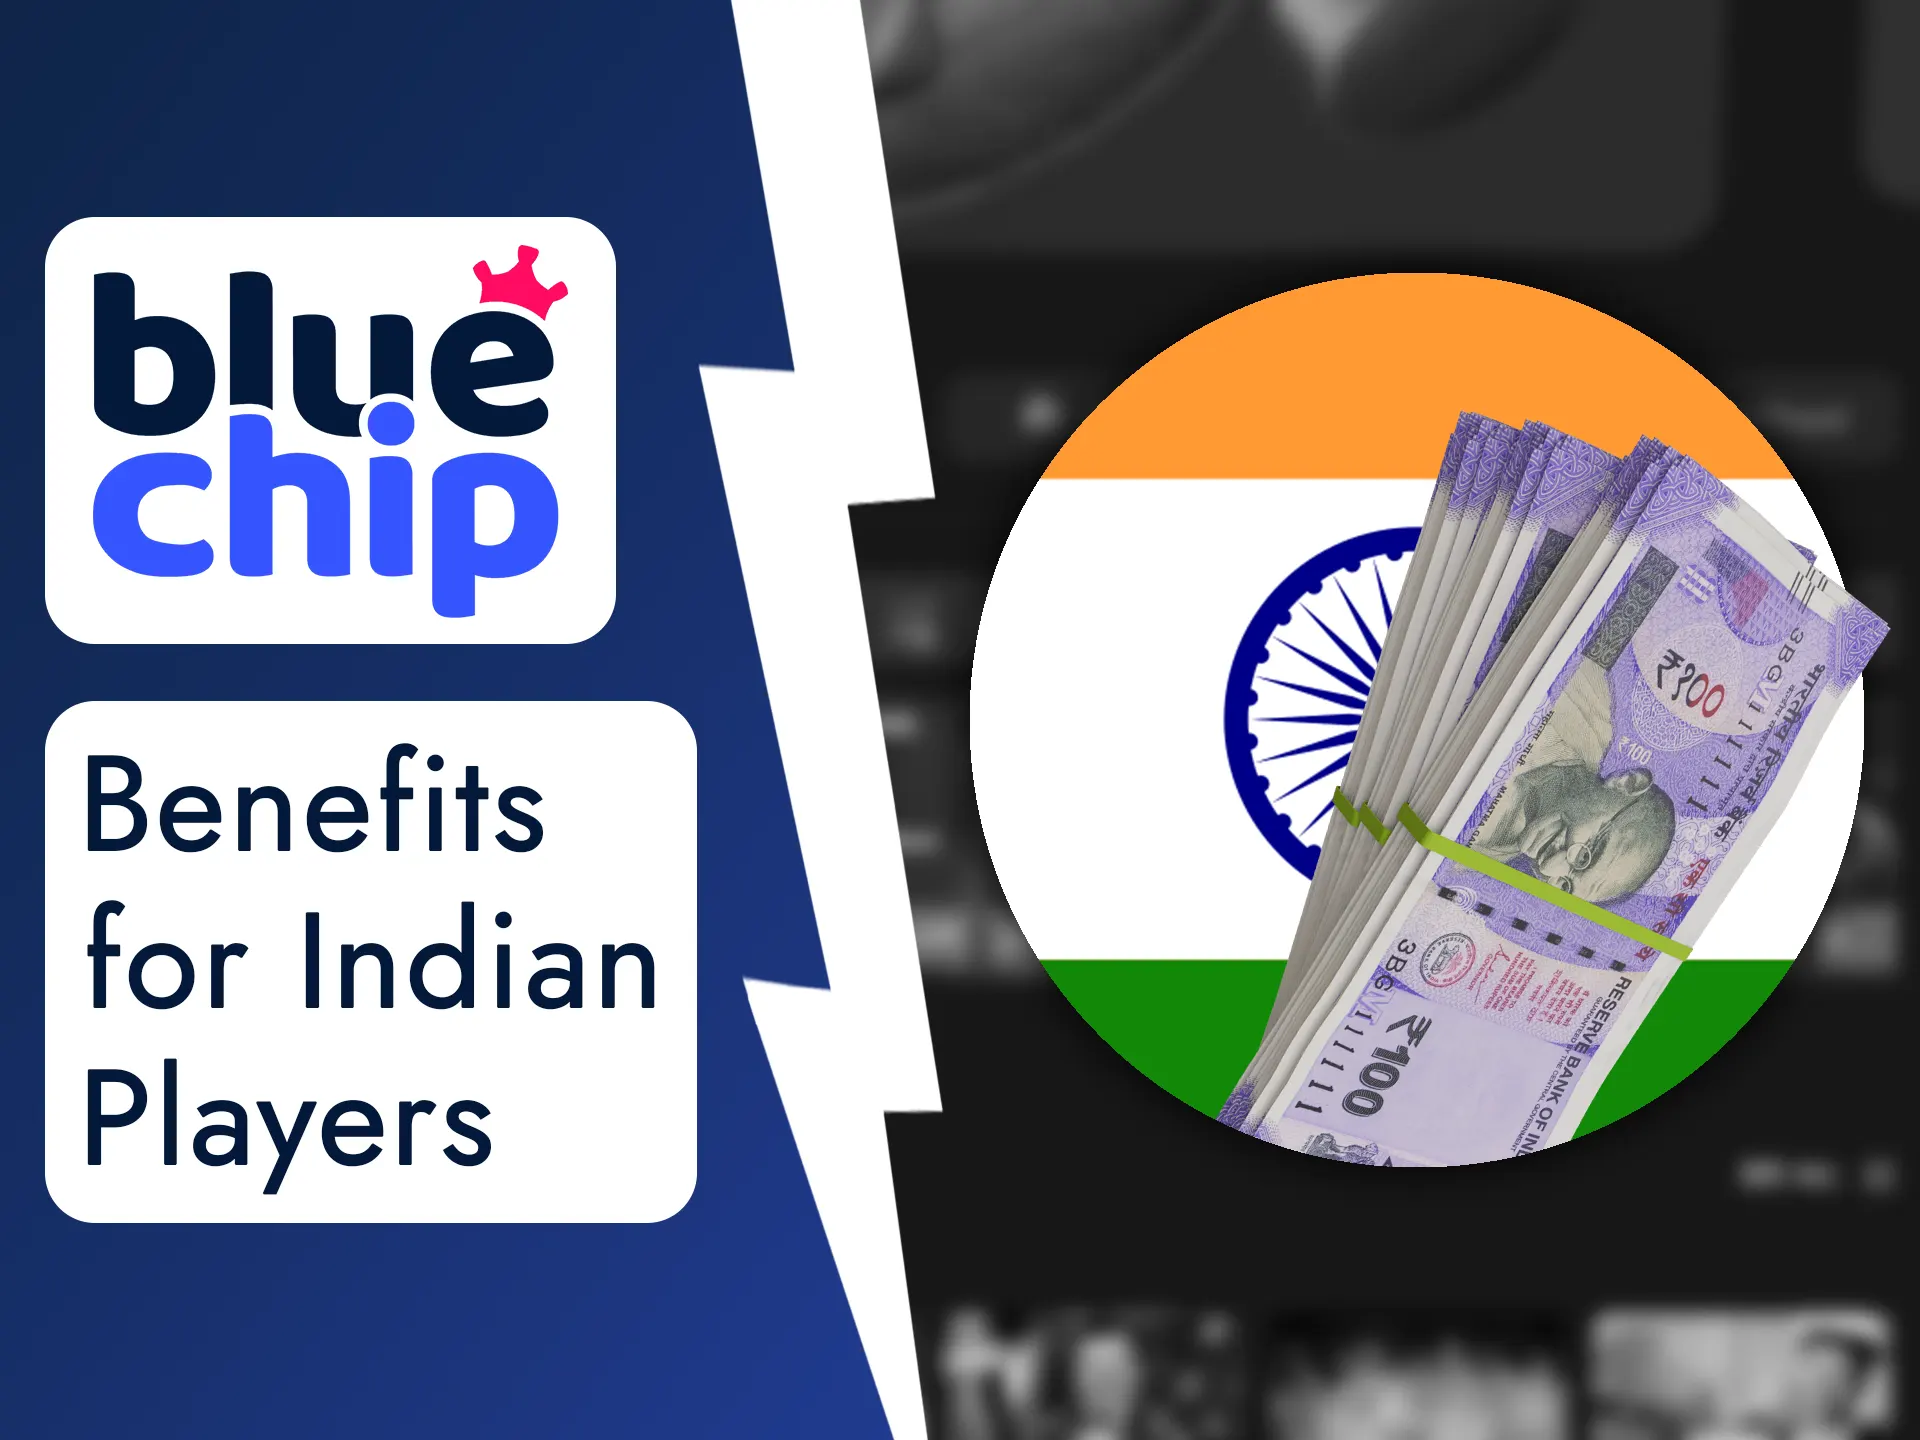 You has benefits for betting if you live in India.